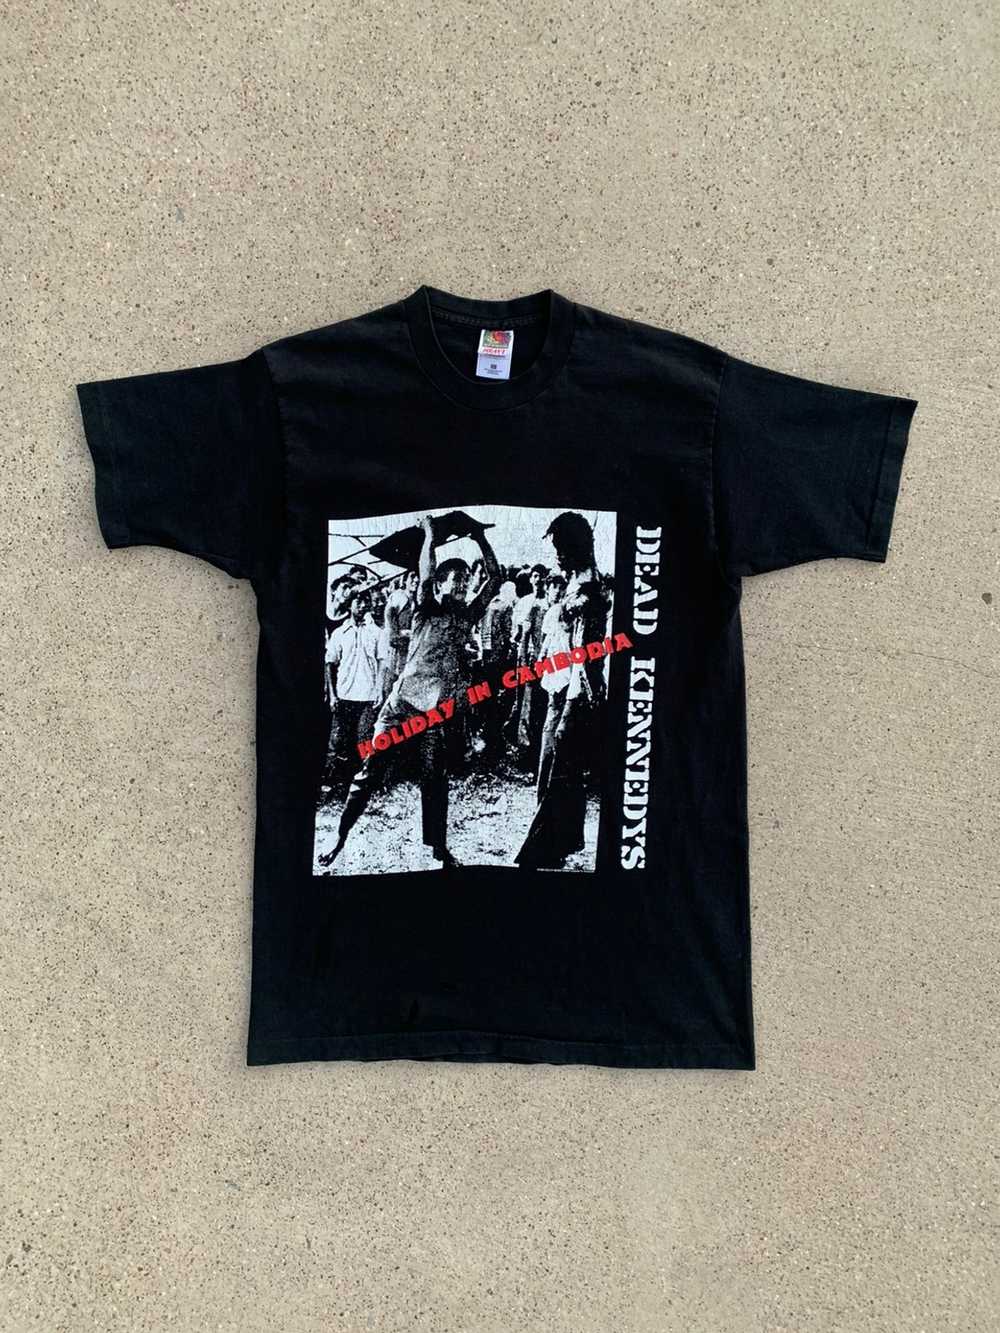 Band Tees × Brockum 1995 Dead Kennedys Holiday in… - image 1